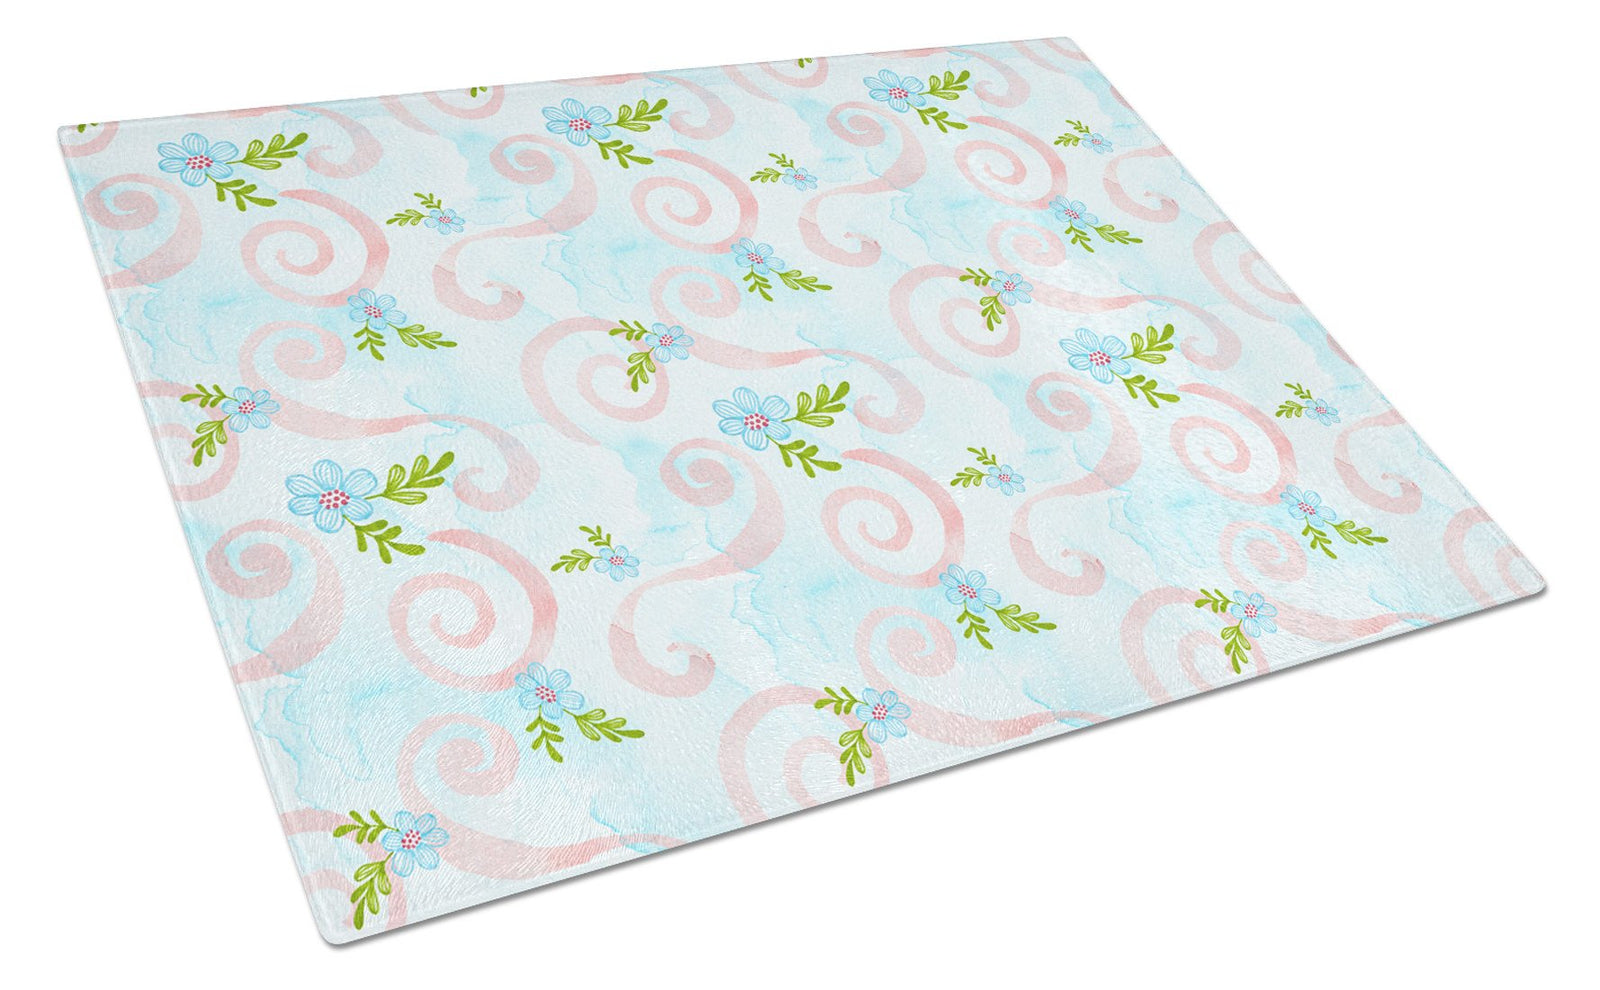 Watercolor Blue Flowers and Swirls Glass Cutting Board Large BB7482LCB by Caroline's Treasures